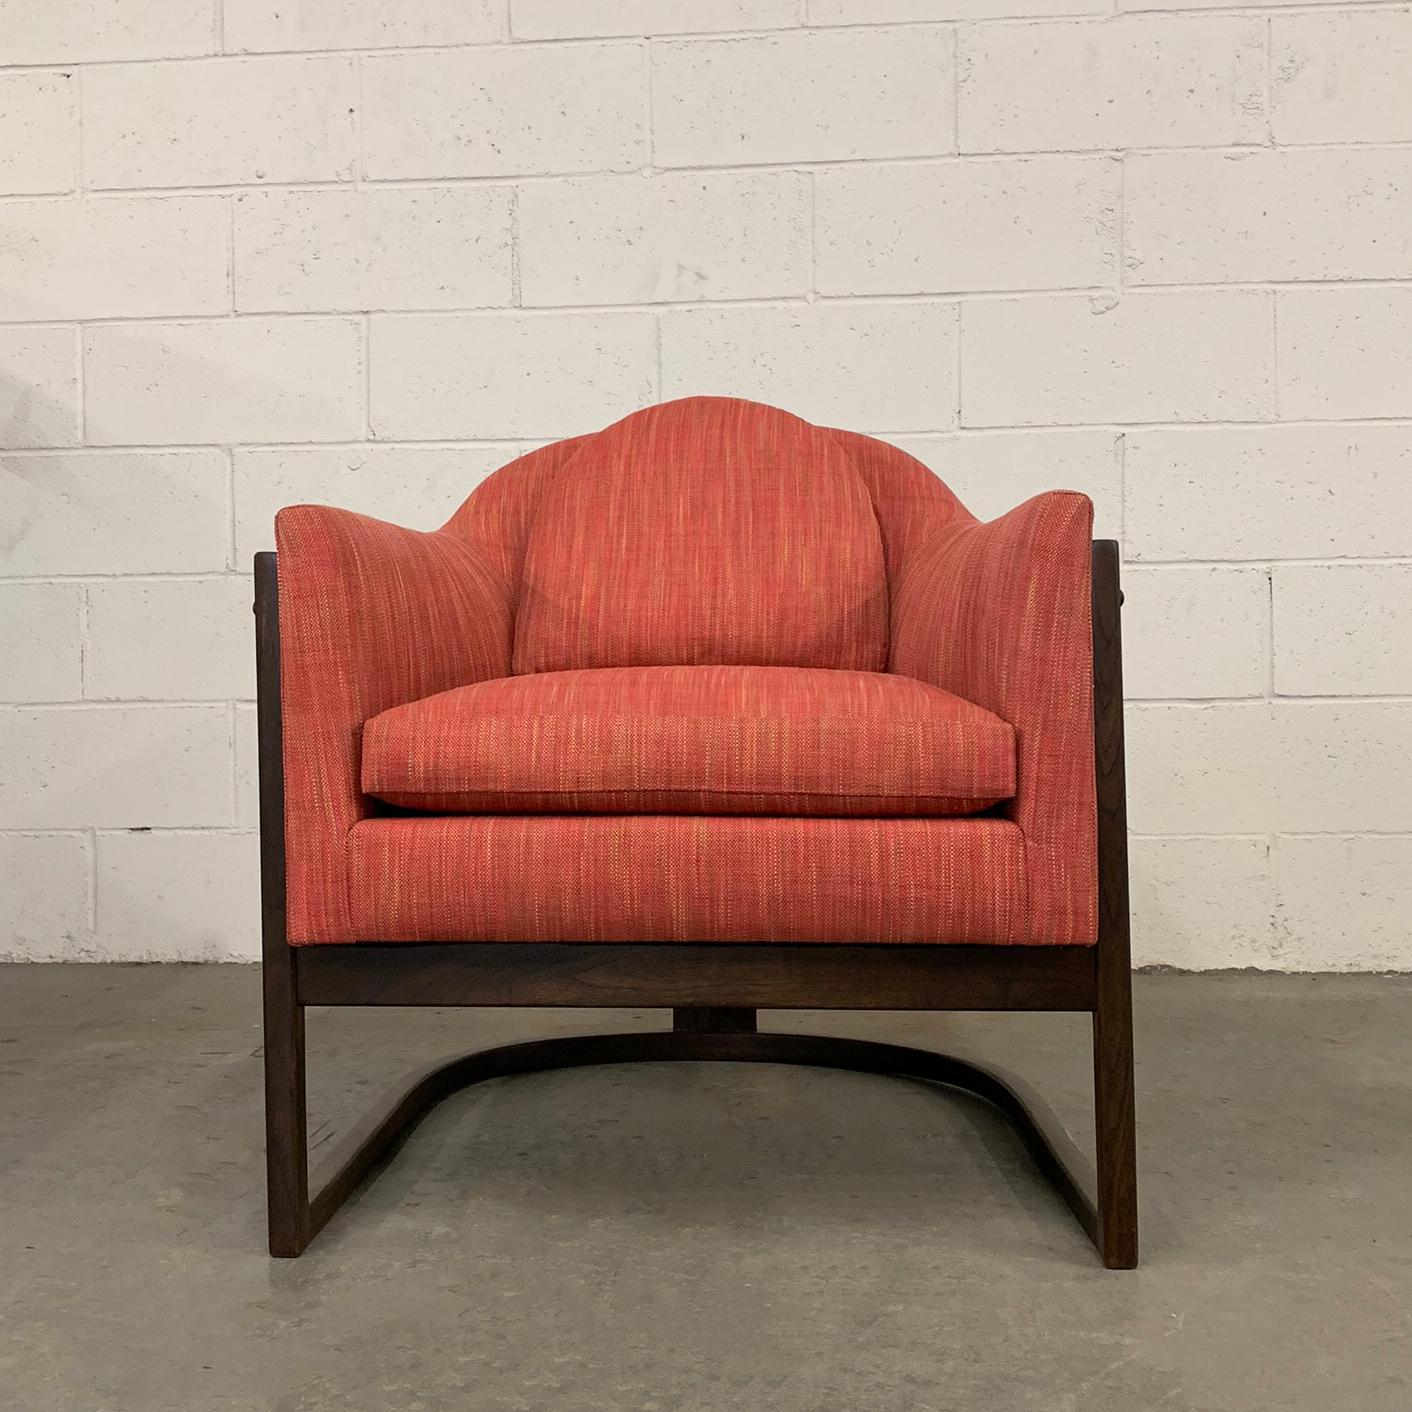 Mid-Century Modern, club chair attributed to Harvey Probber features a round, barrel shape, walnut frame with rosewood trim is newly upholstered in a raspberry tweed, cotton linen blend.